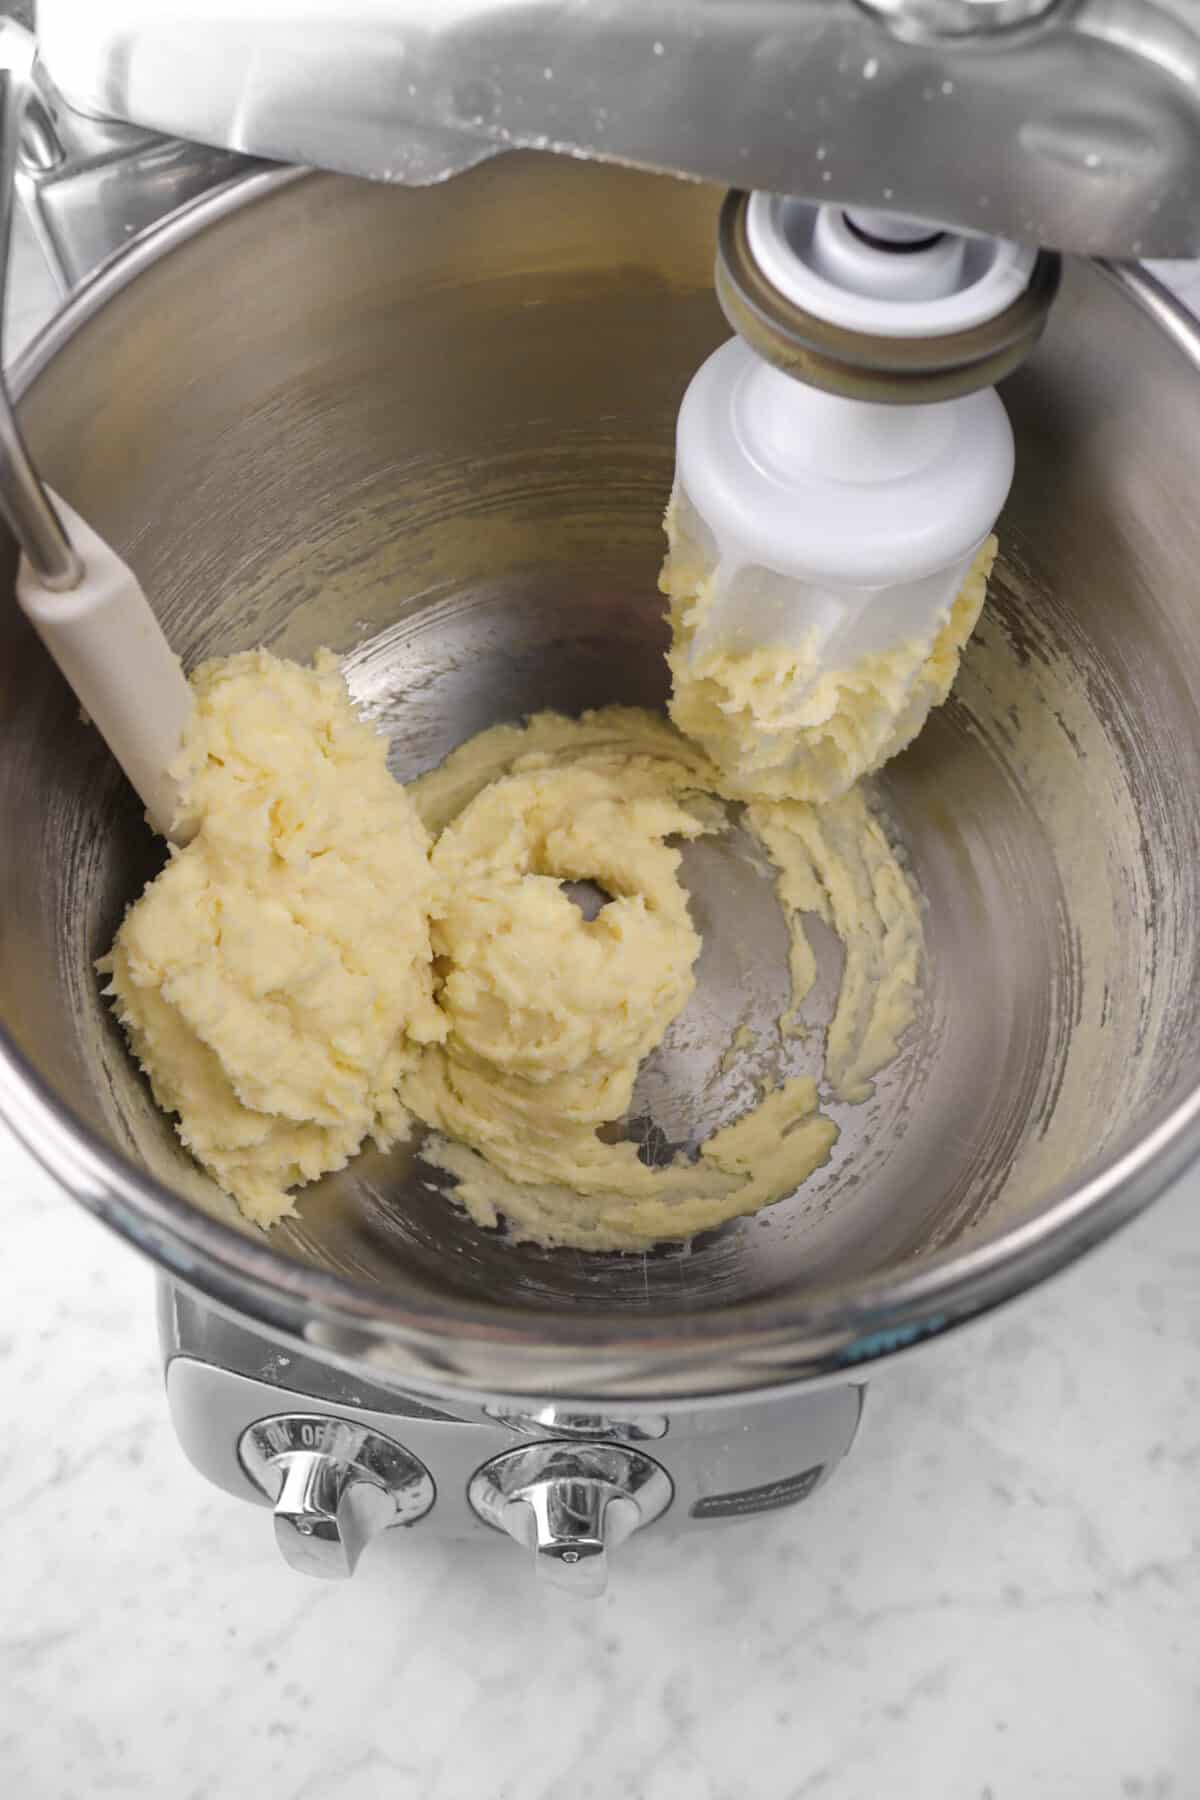 butter, sugar, and vanilla whipped in a mixer